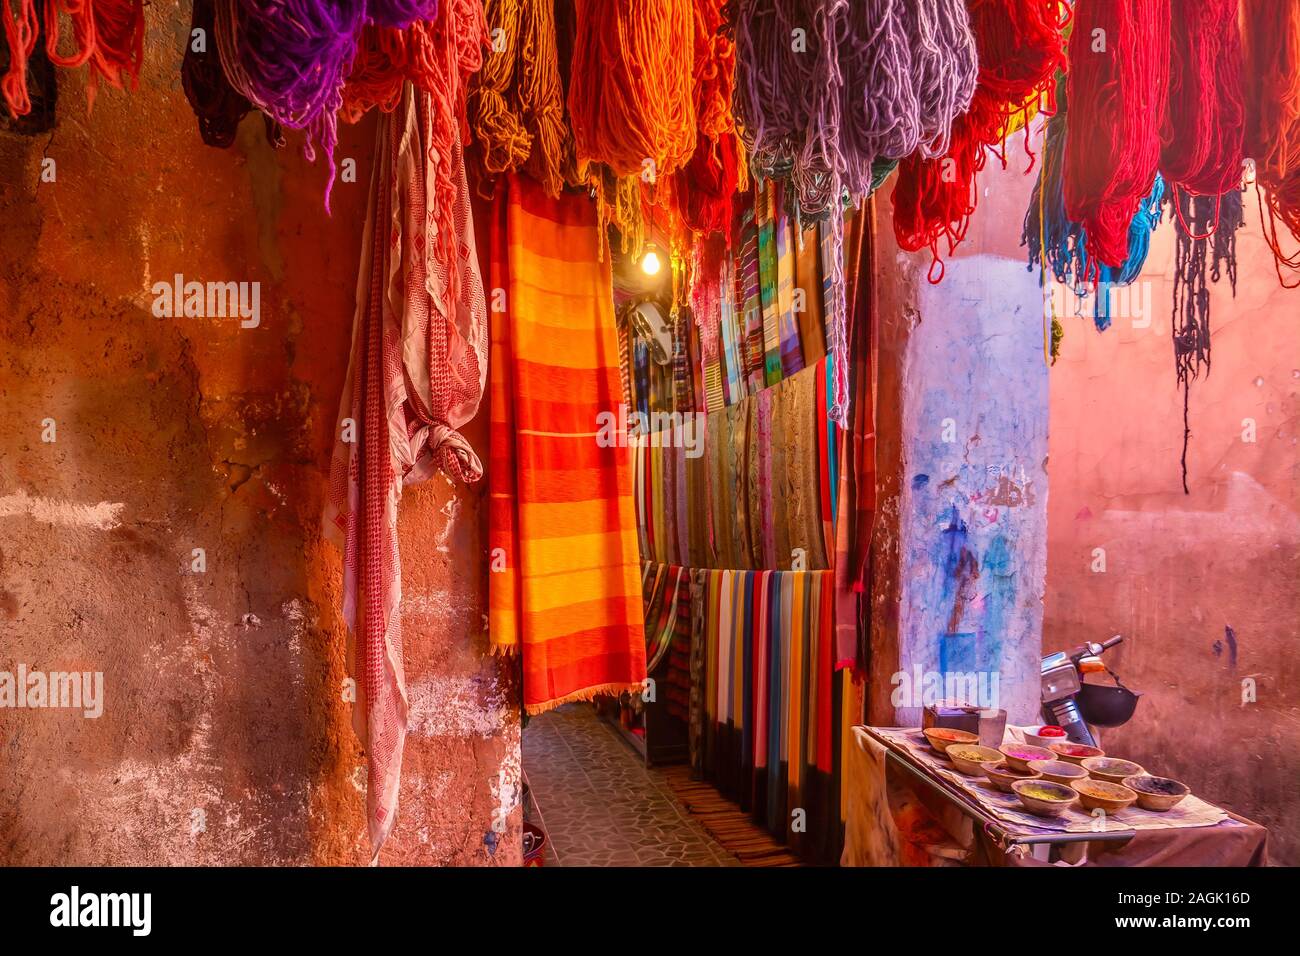 Vibrant color outside a tourist shop in Morocco, with colorful scarves, yarn and paint pigment on textured walls. In the medina of Marrakech. Stock Photo